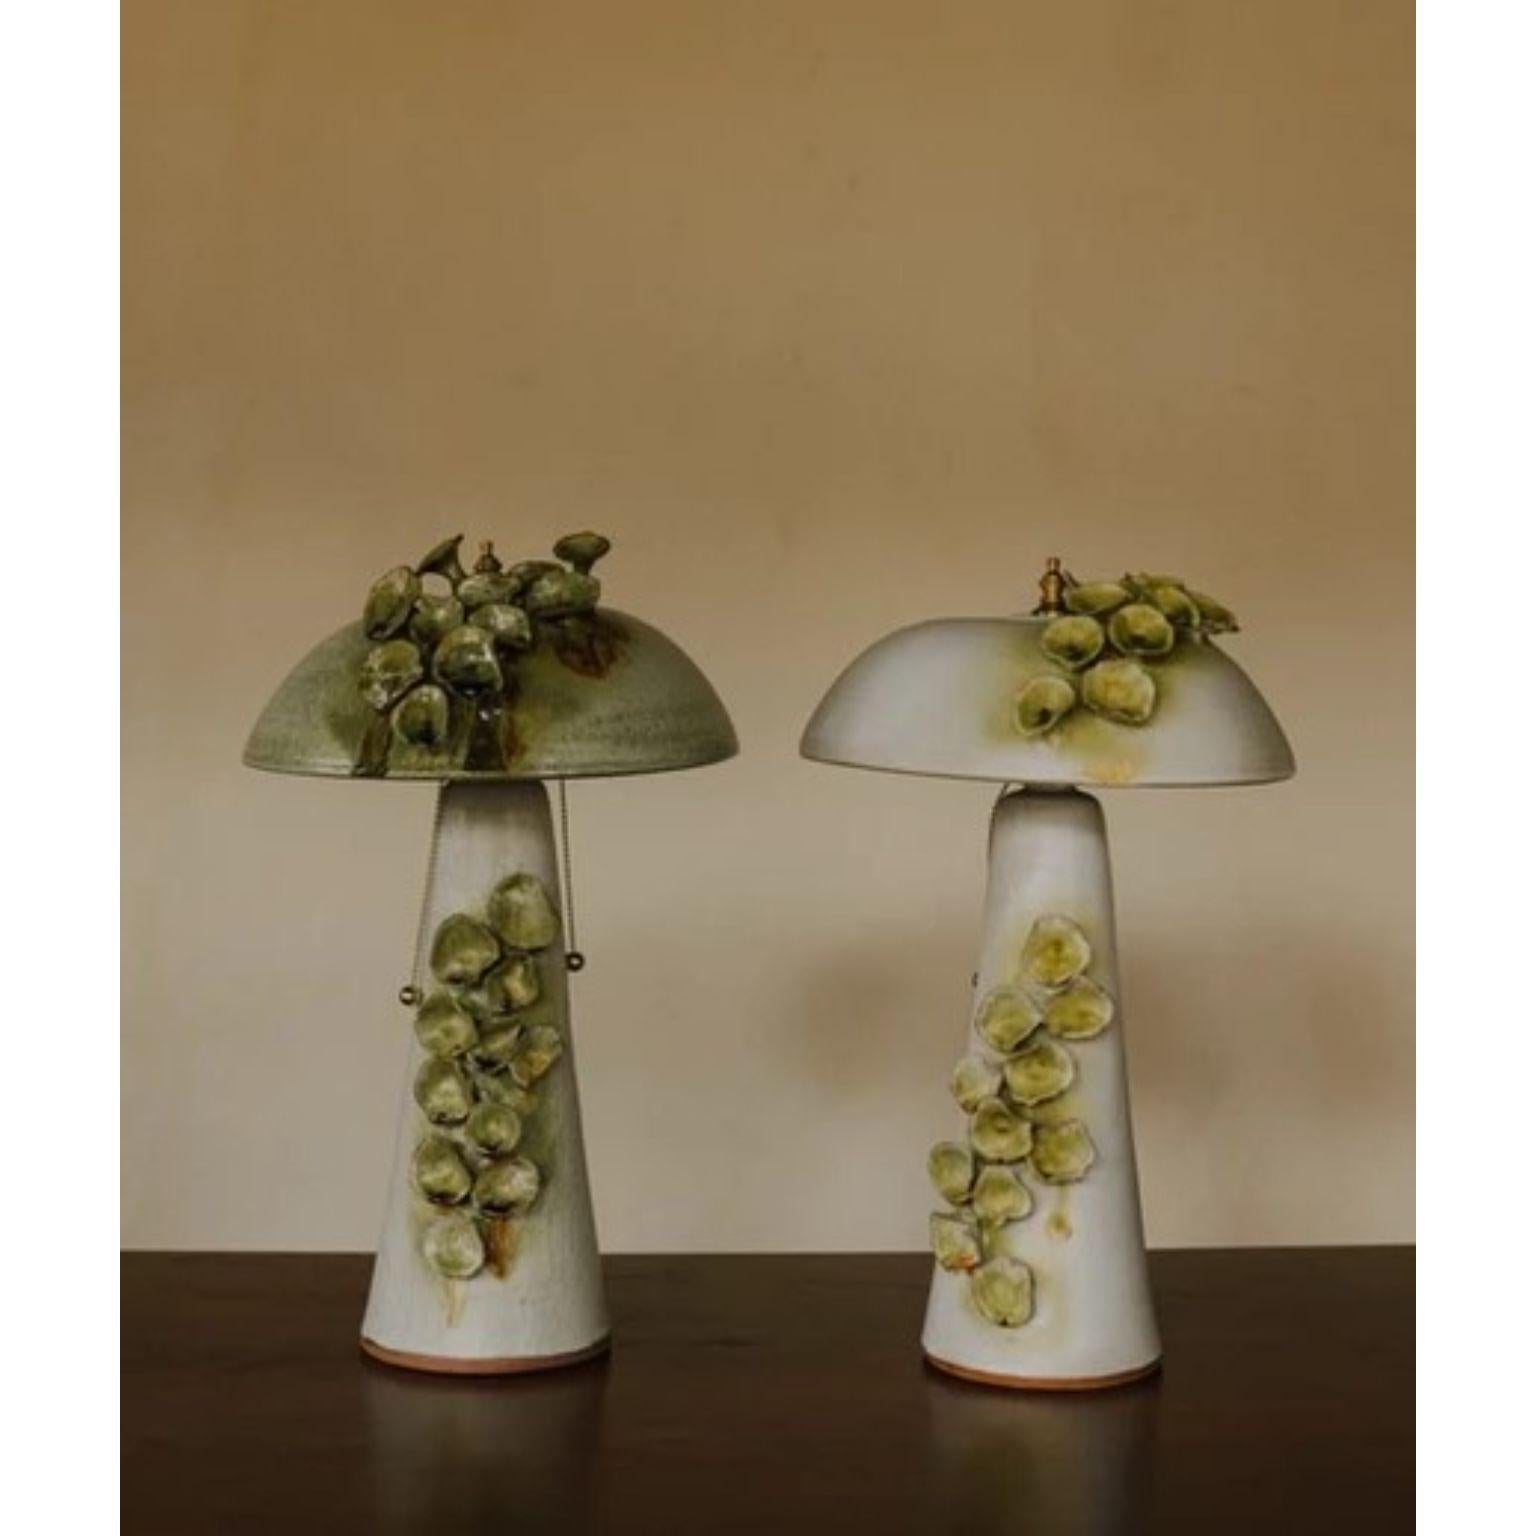 Set of 2 Mushroom lamps by Casa Alfarera
Dimensions: D25 x H45.7 cm
Materials: Stoneware, brass

All our lamps can be wired according to each country. If sold to the USA it will be wired for the USA for instance.

Casa Alfarera Santo Domingo is a